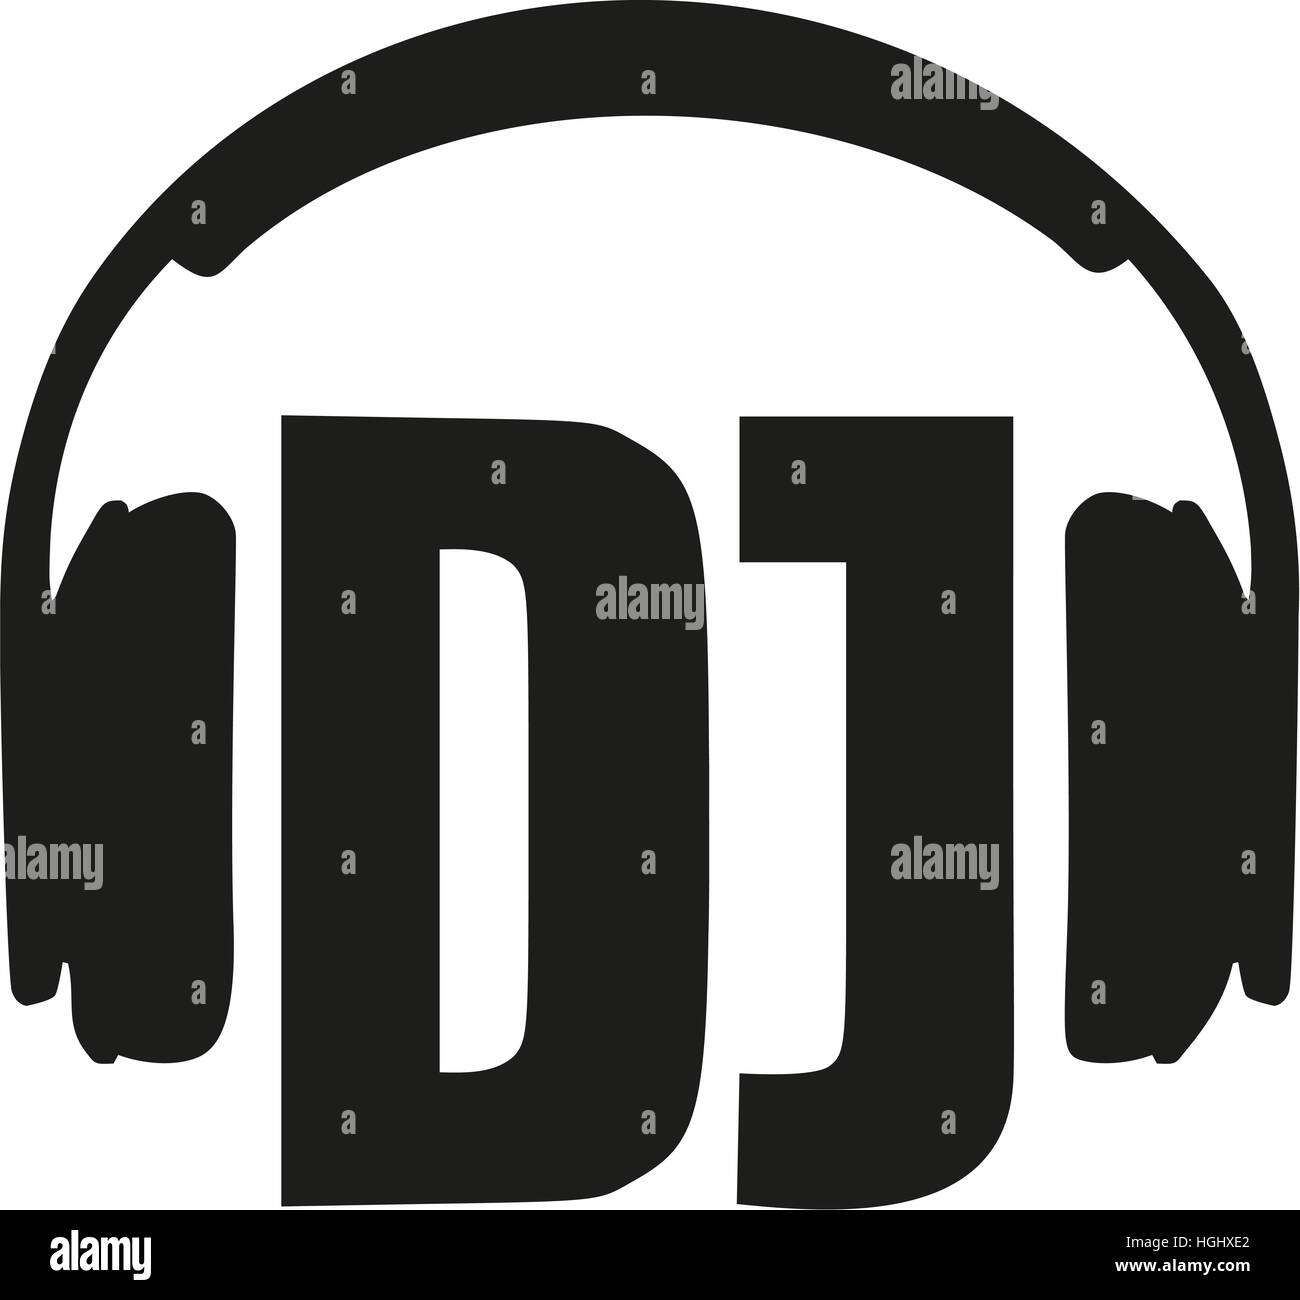 dj pictures and logos